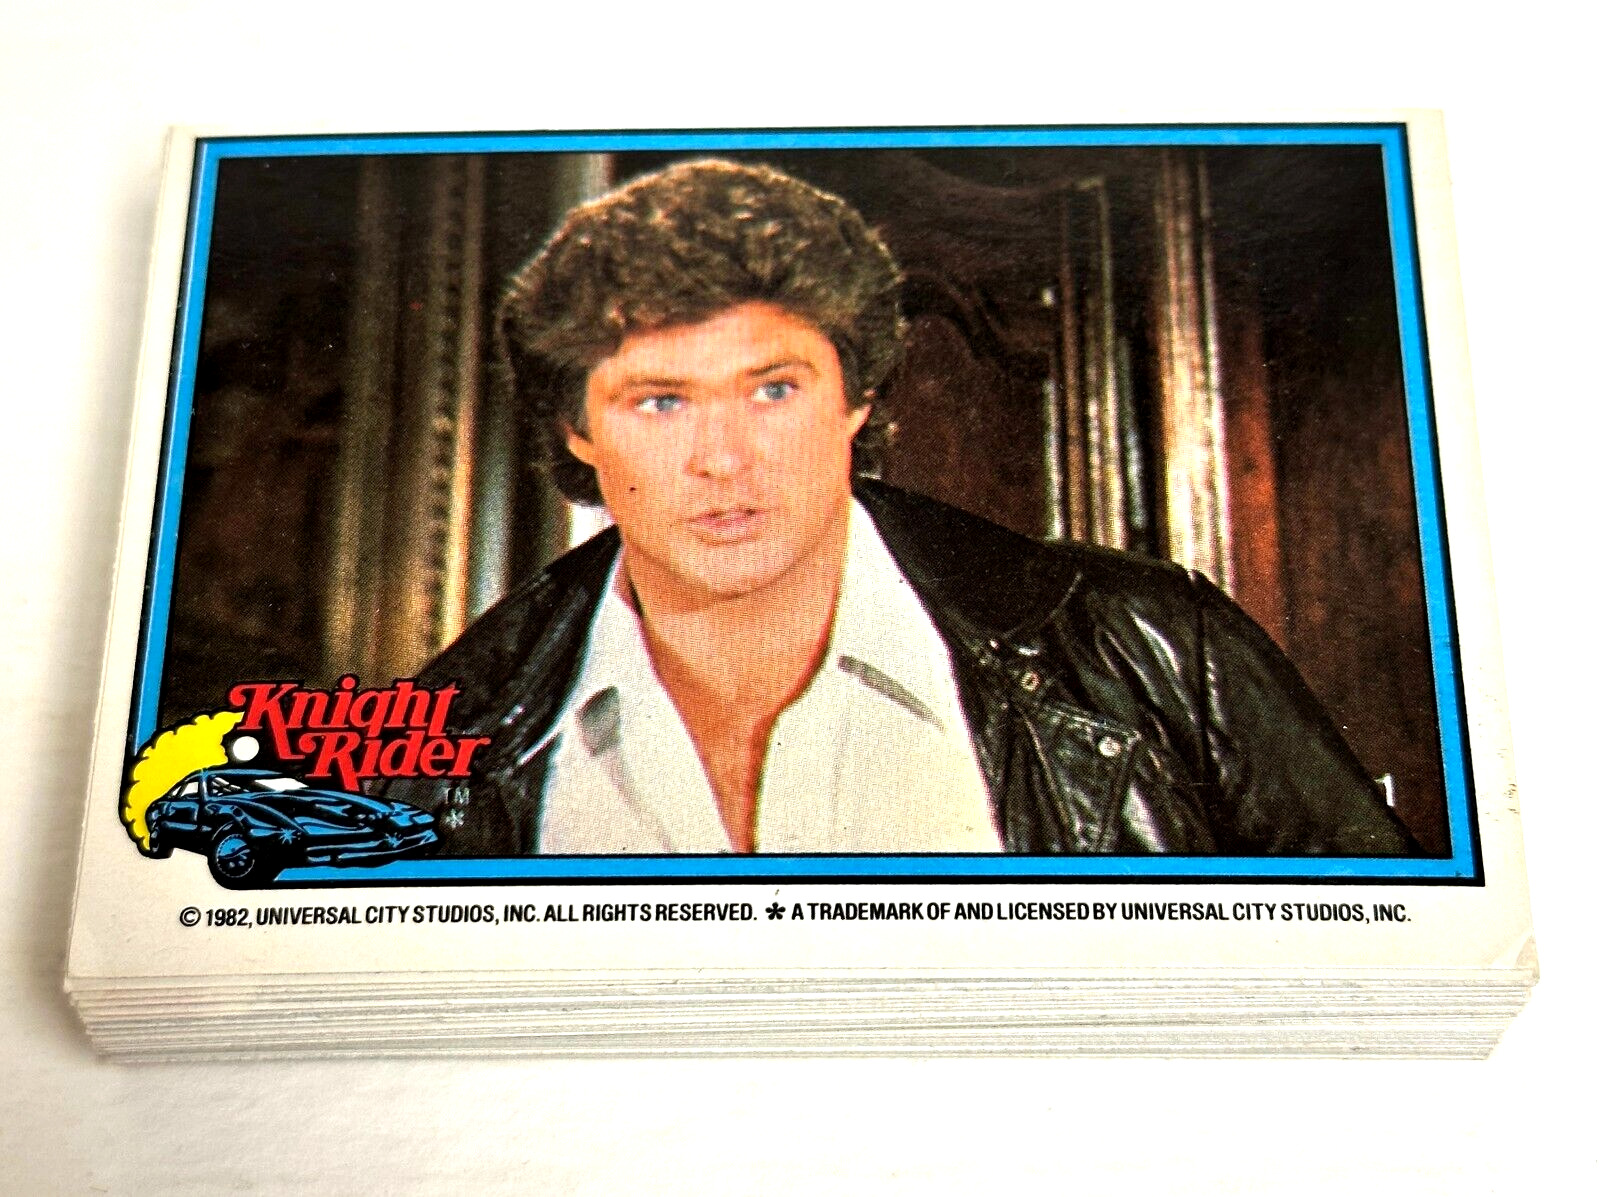 1985 Knight Rider (TV Series) Complete Trading Card Set 1-55 from Donruss